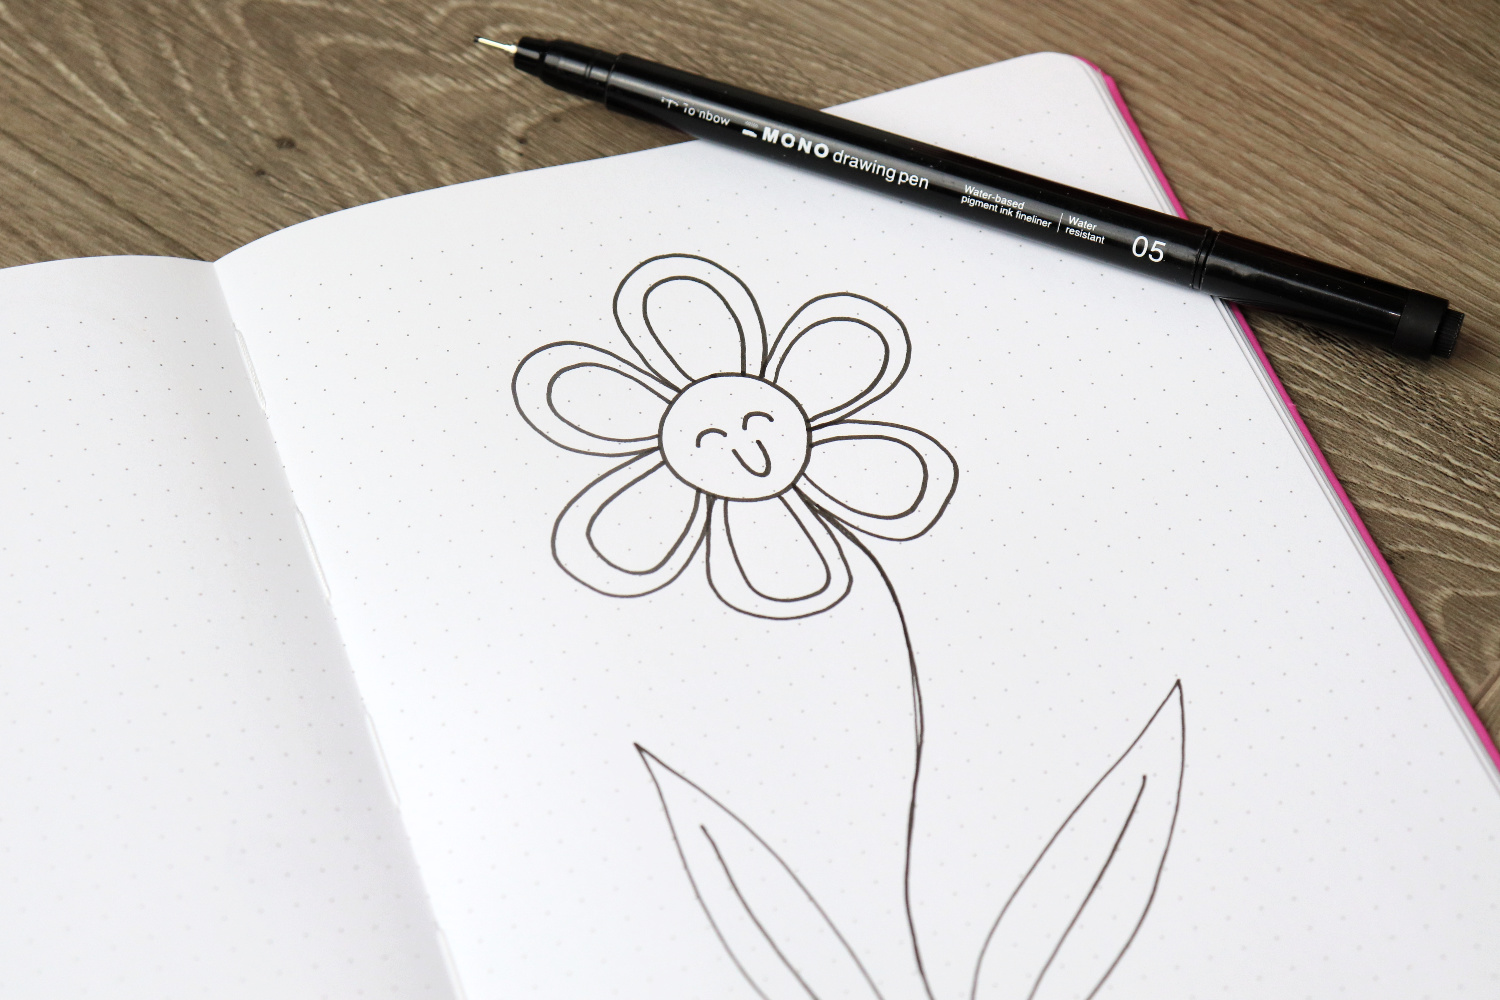 Image contains an open sketchbook on a wooden desk. A smiling flower is drawn on the page, and a MONO Drawing Pen 05 sits on top.